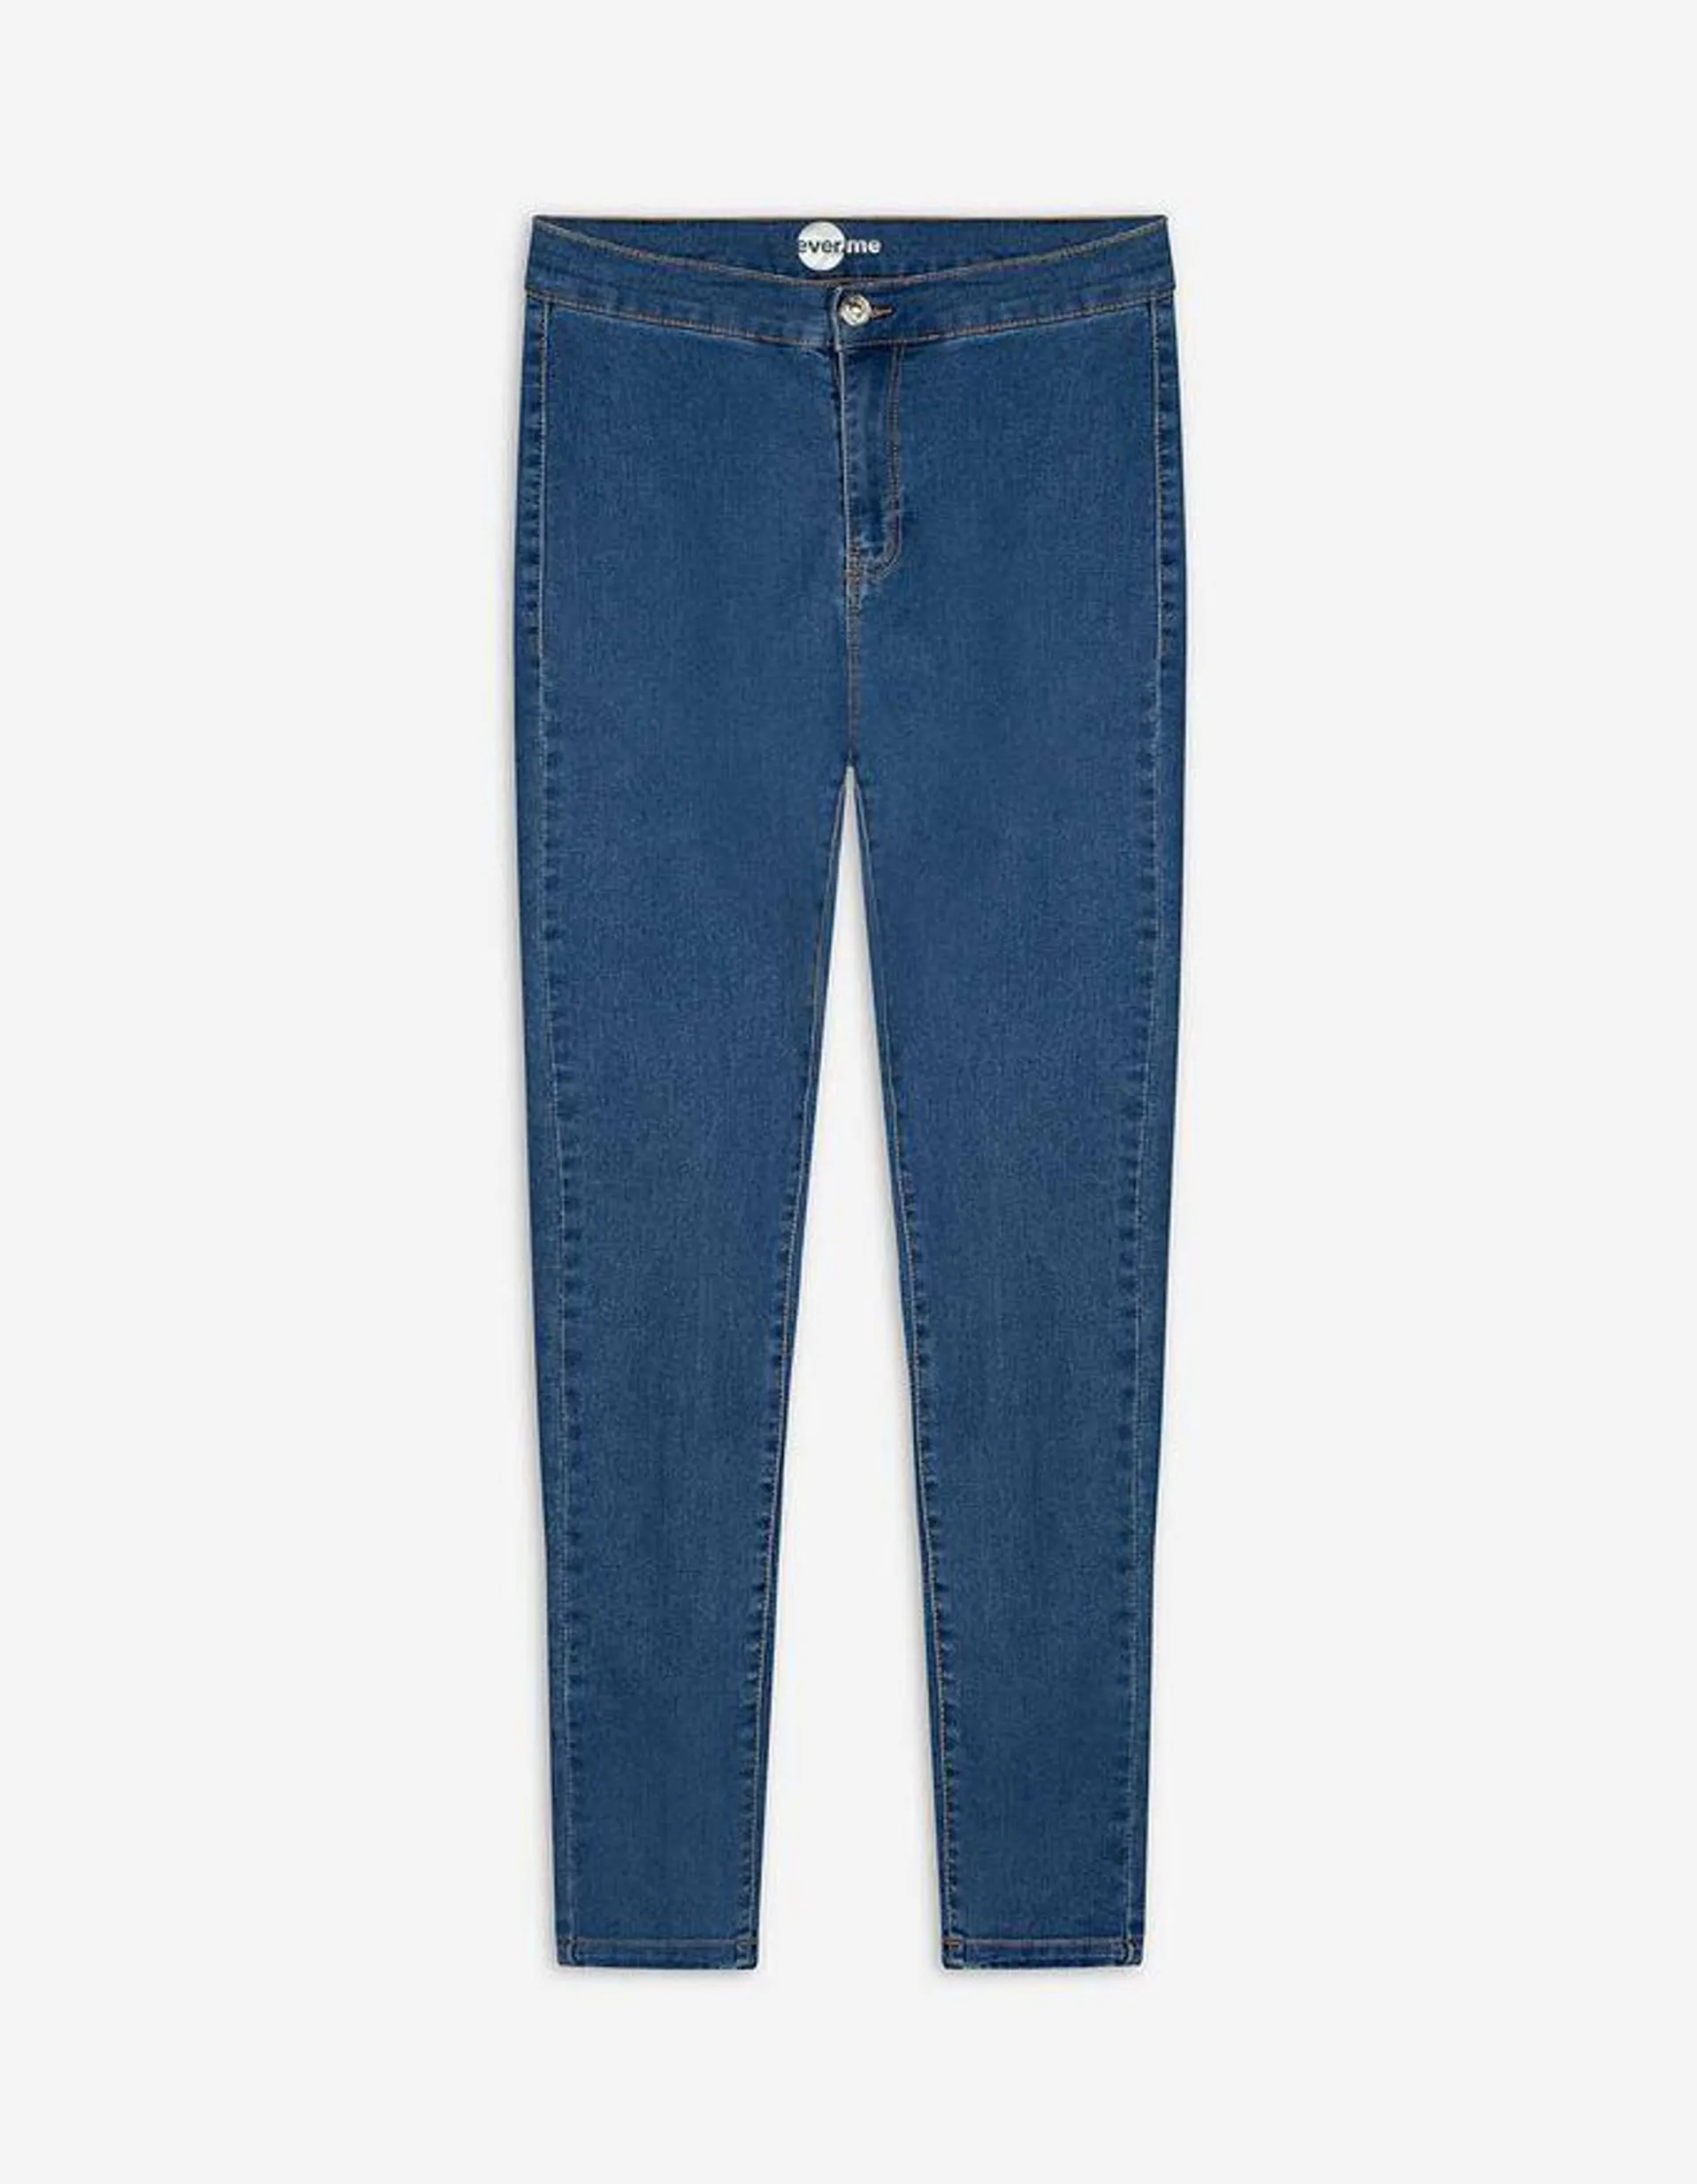 Jean - Coupe Skinny Fit